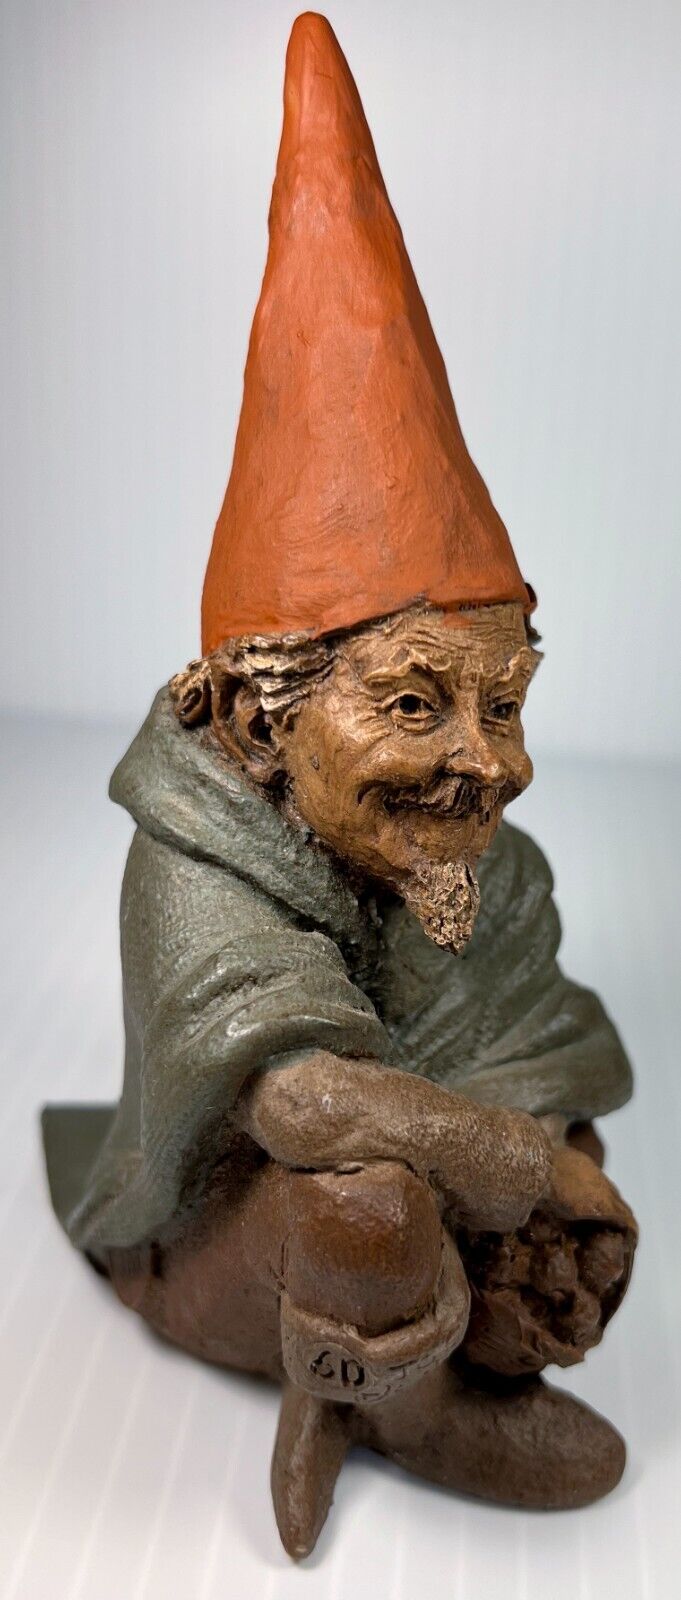 JOSH-R 1983~Tom Clark Gnome~Cairn Studio Item #82~Edition #60~Story is Included